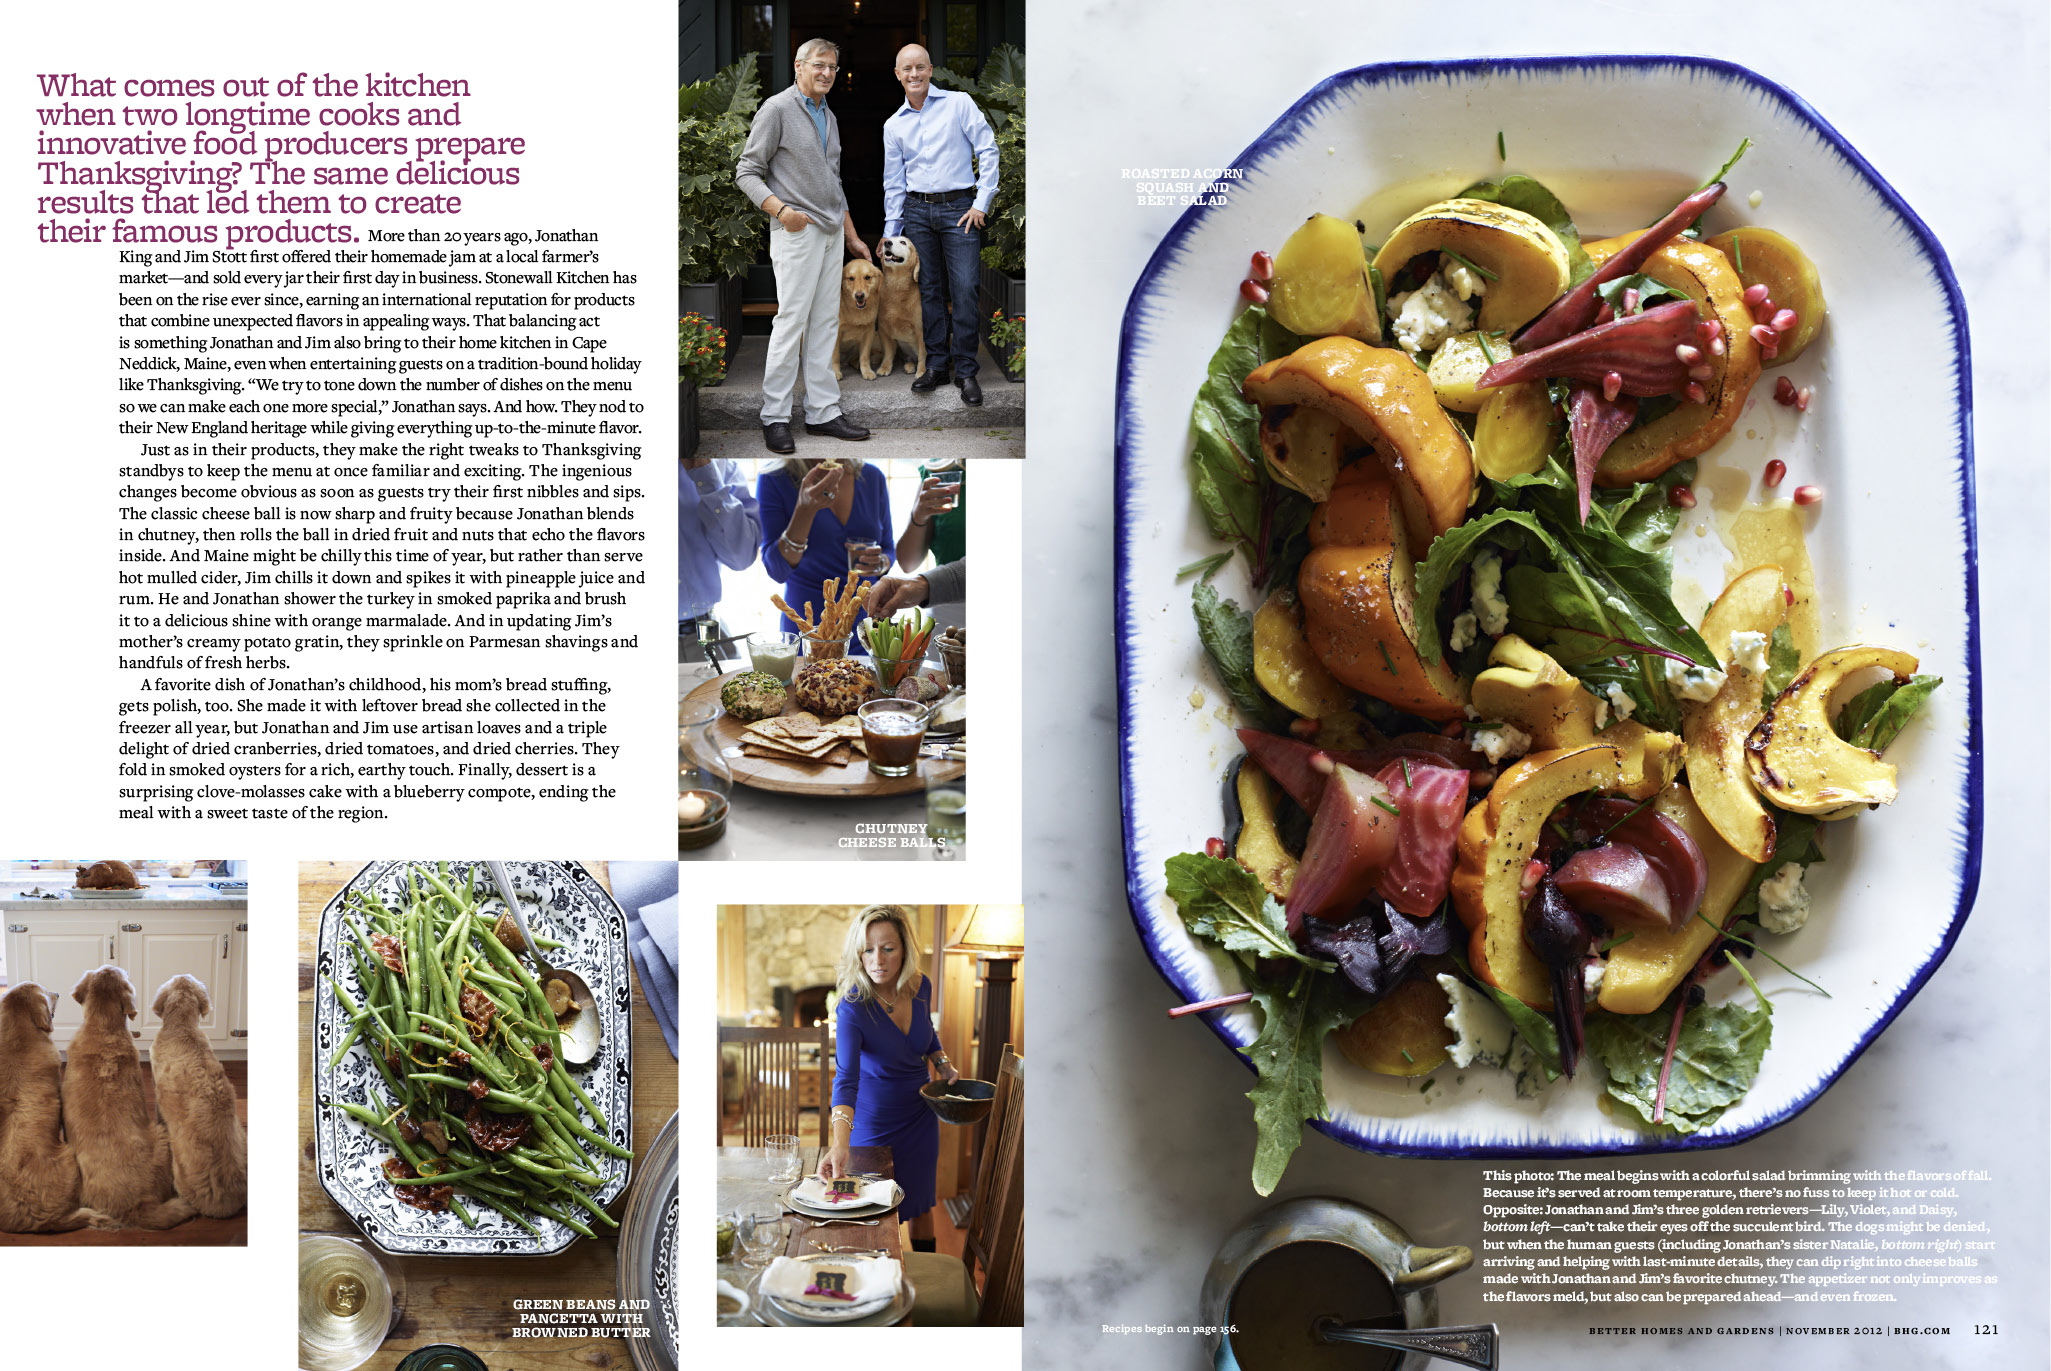 <strong>Maine-Made Thanksgiving, Better Homes & Gardens Magazine</strong><br />Words: Joe Yonan | Recipes: Jonathan King & Kathy Gunst | Photos: Con Poulos | Food Styling: Jill Lust & Contance Pikulas | Prop Styling: Sue Mitchell